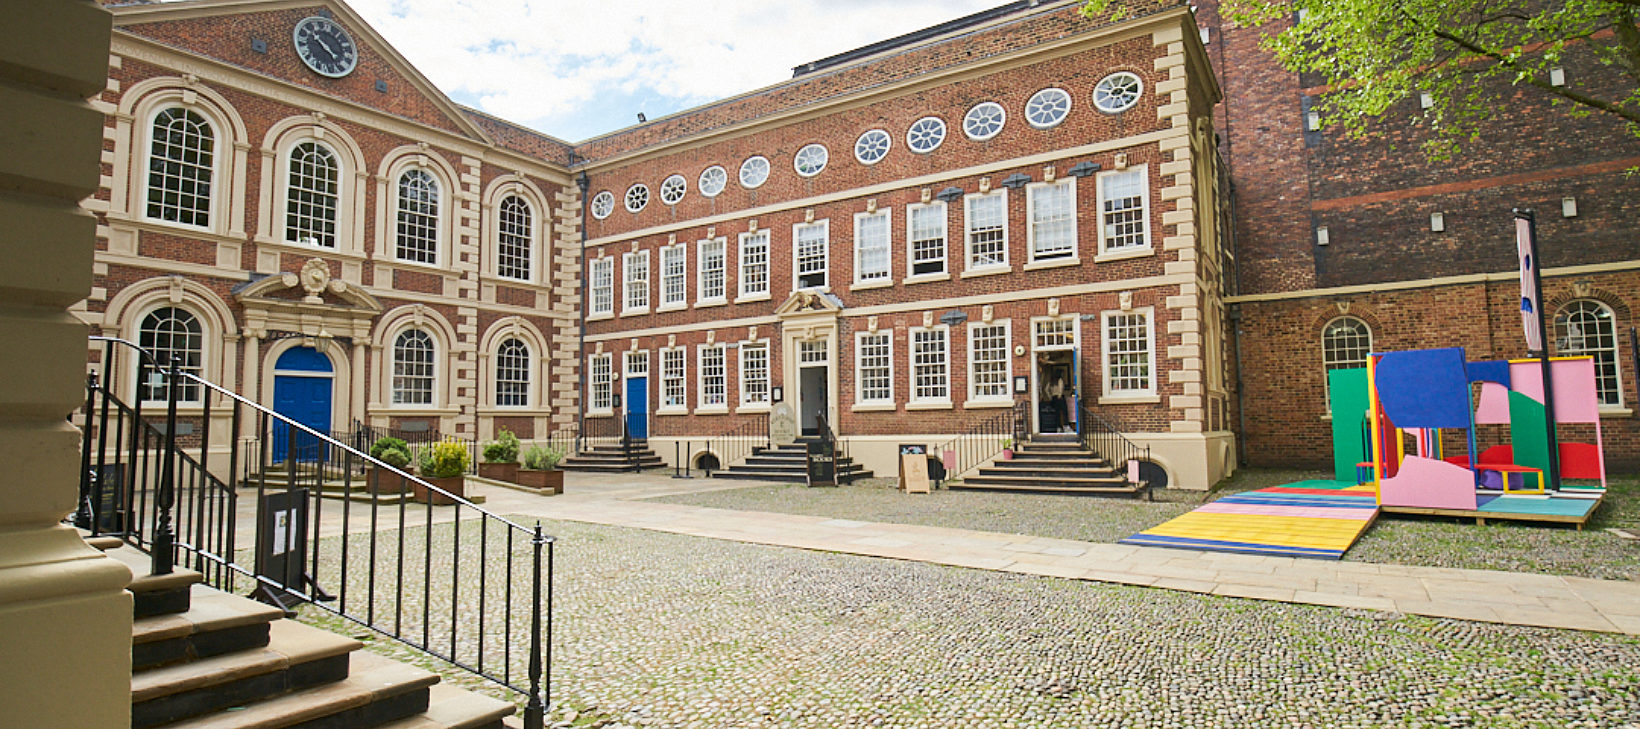 Image shows the Bluecoat building from the courtyard, with Bluecoat Platform, a colourful sculpture, in the right hand corner.